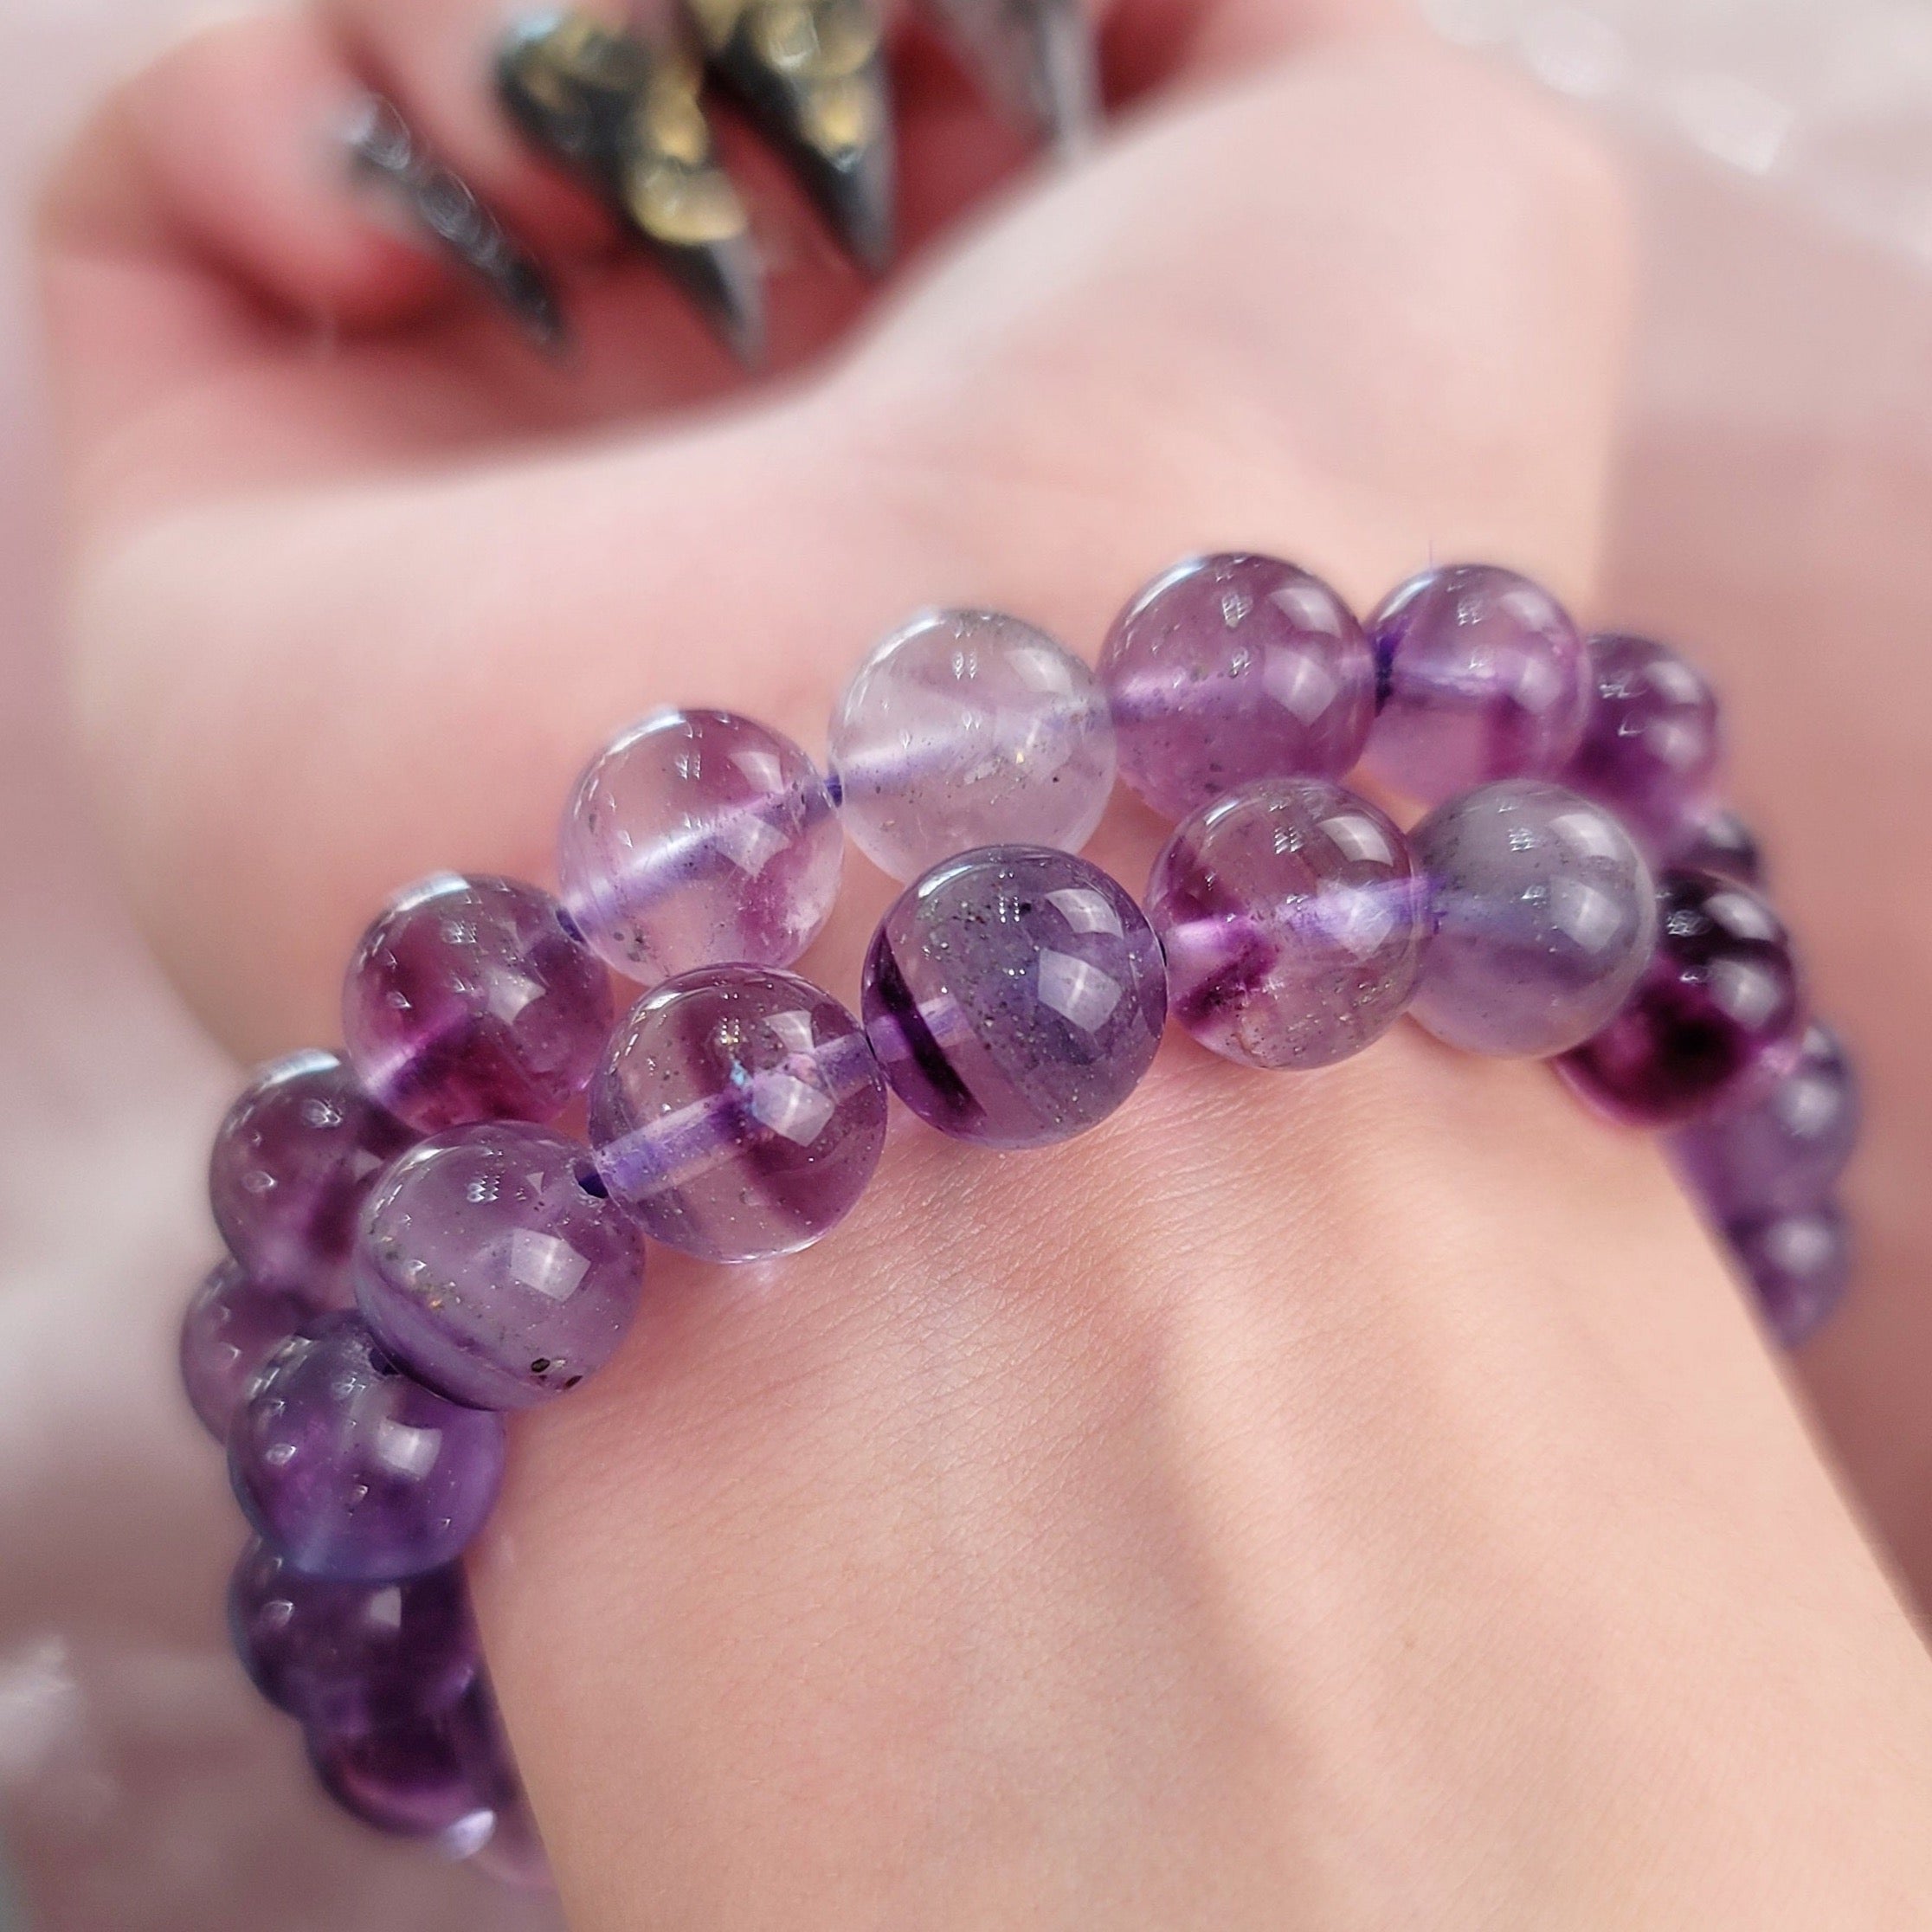 Fluorite with Pyrite Bracelet for Good Luck, Focus and Mental Clarity